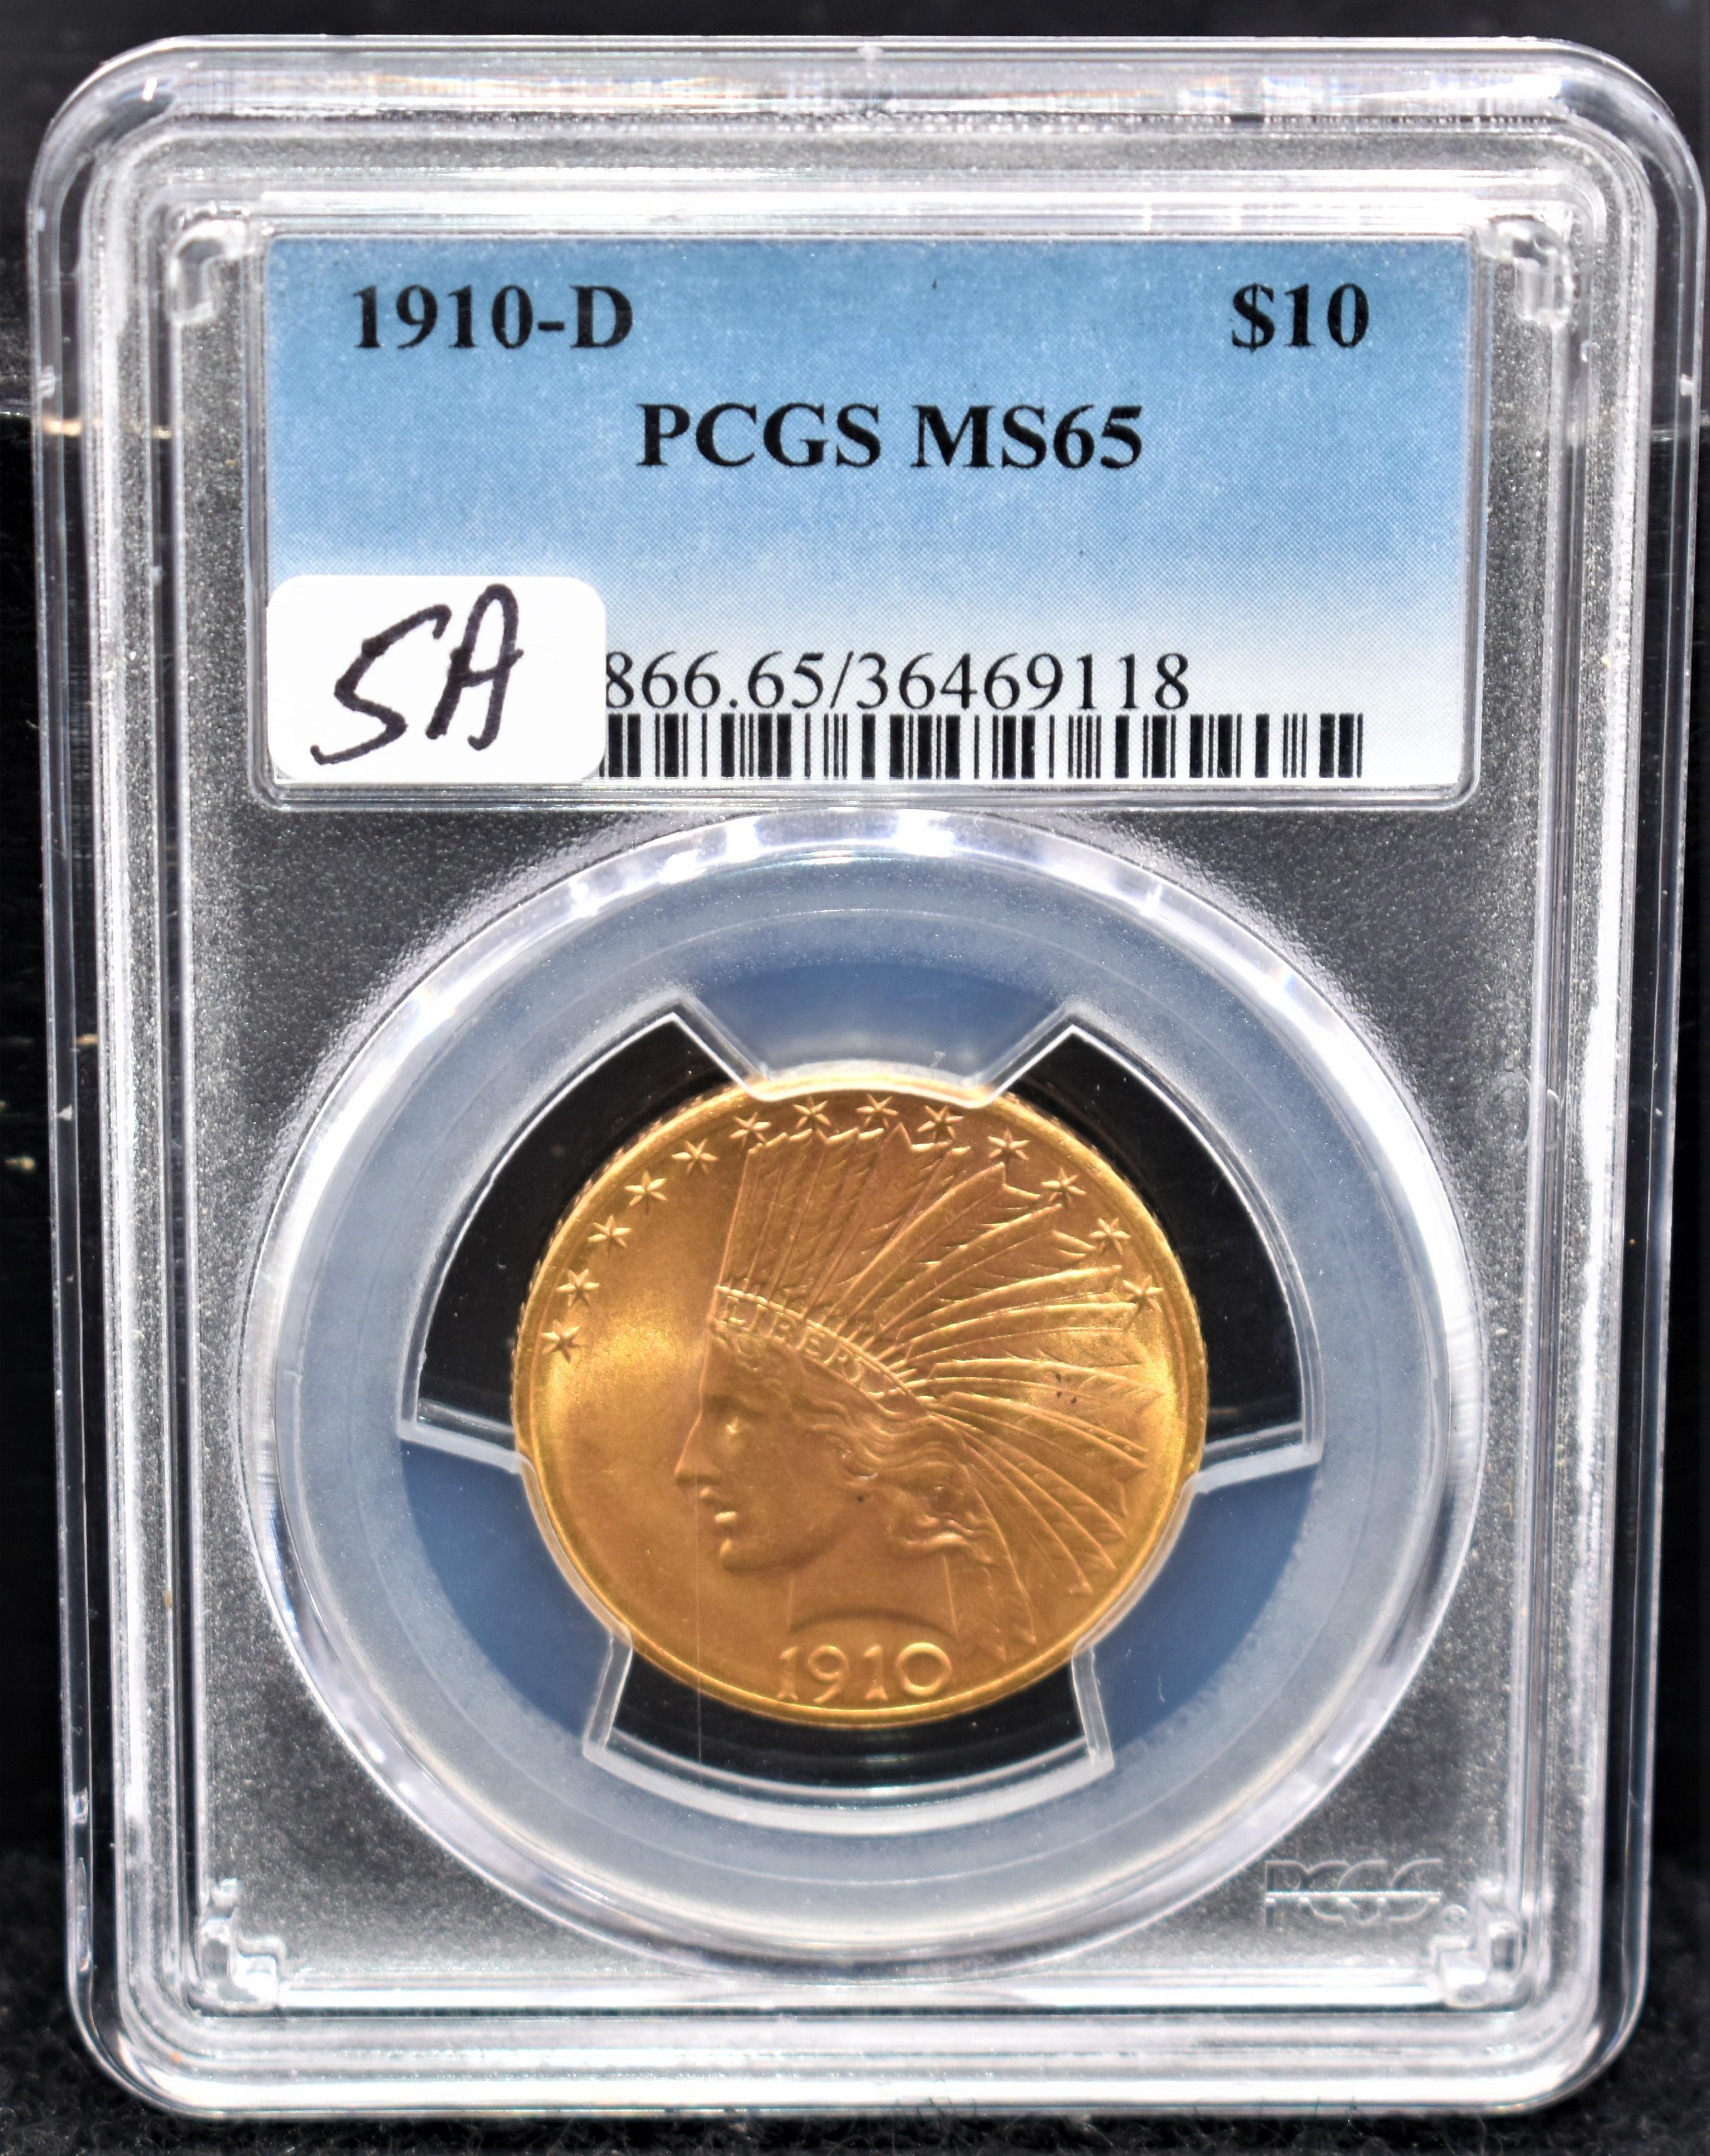 KEY 1910-D $10 INDIAN GOLD COIN PCGS MS65